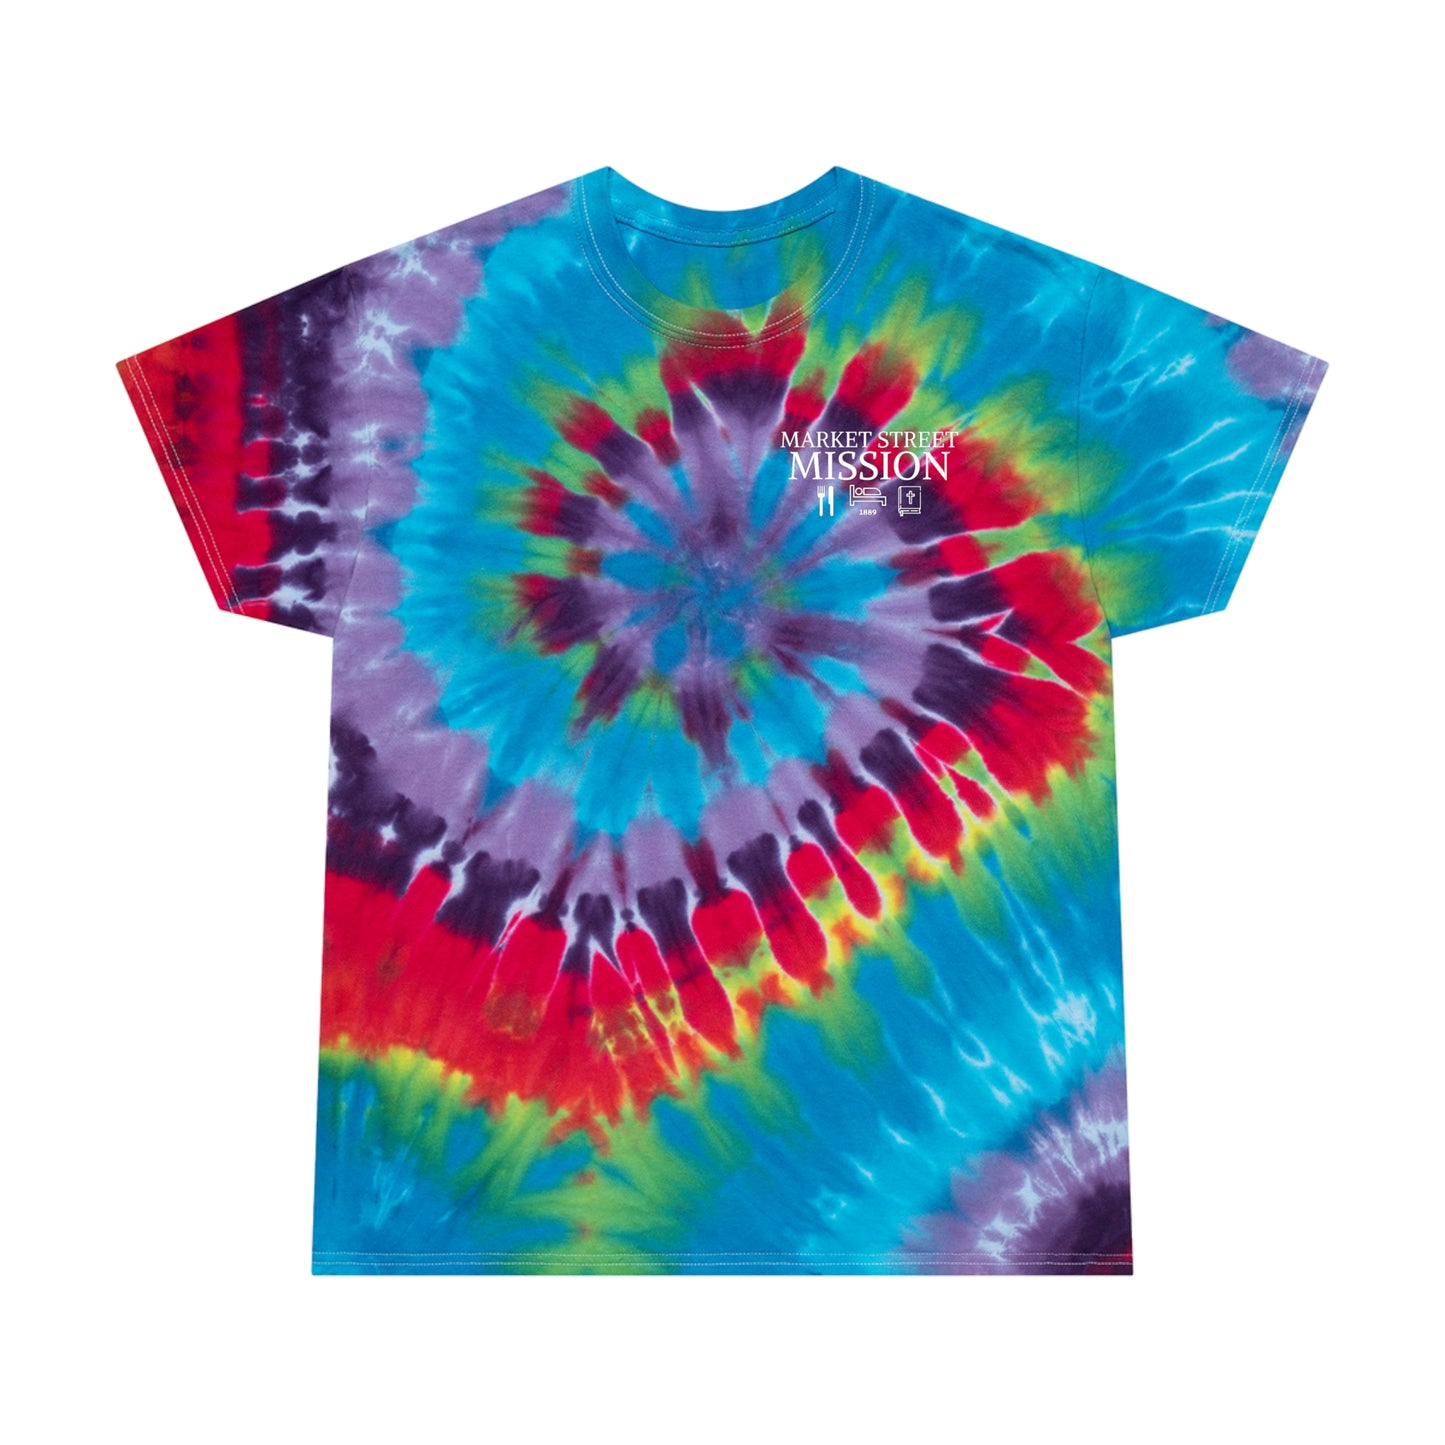 SUMMER EXCLUSIVE - "Meals Shelter Hope" Tie-Dye